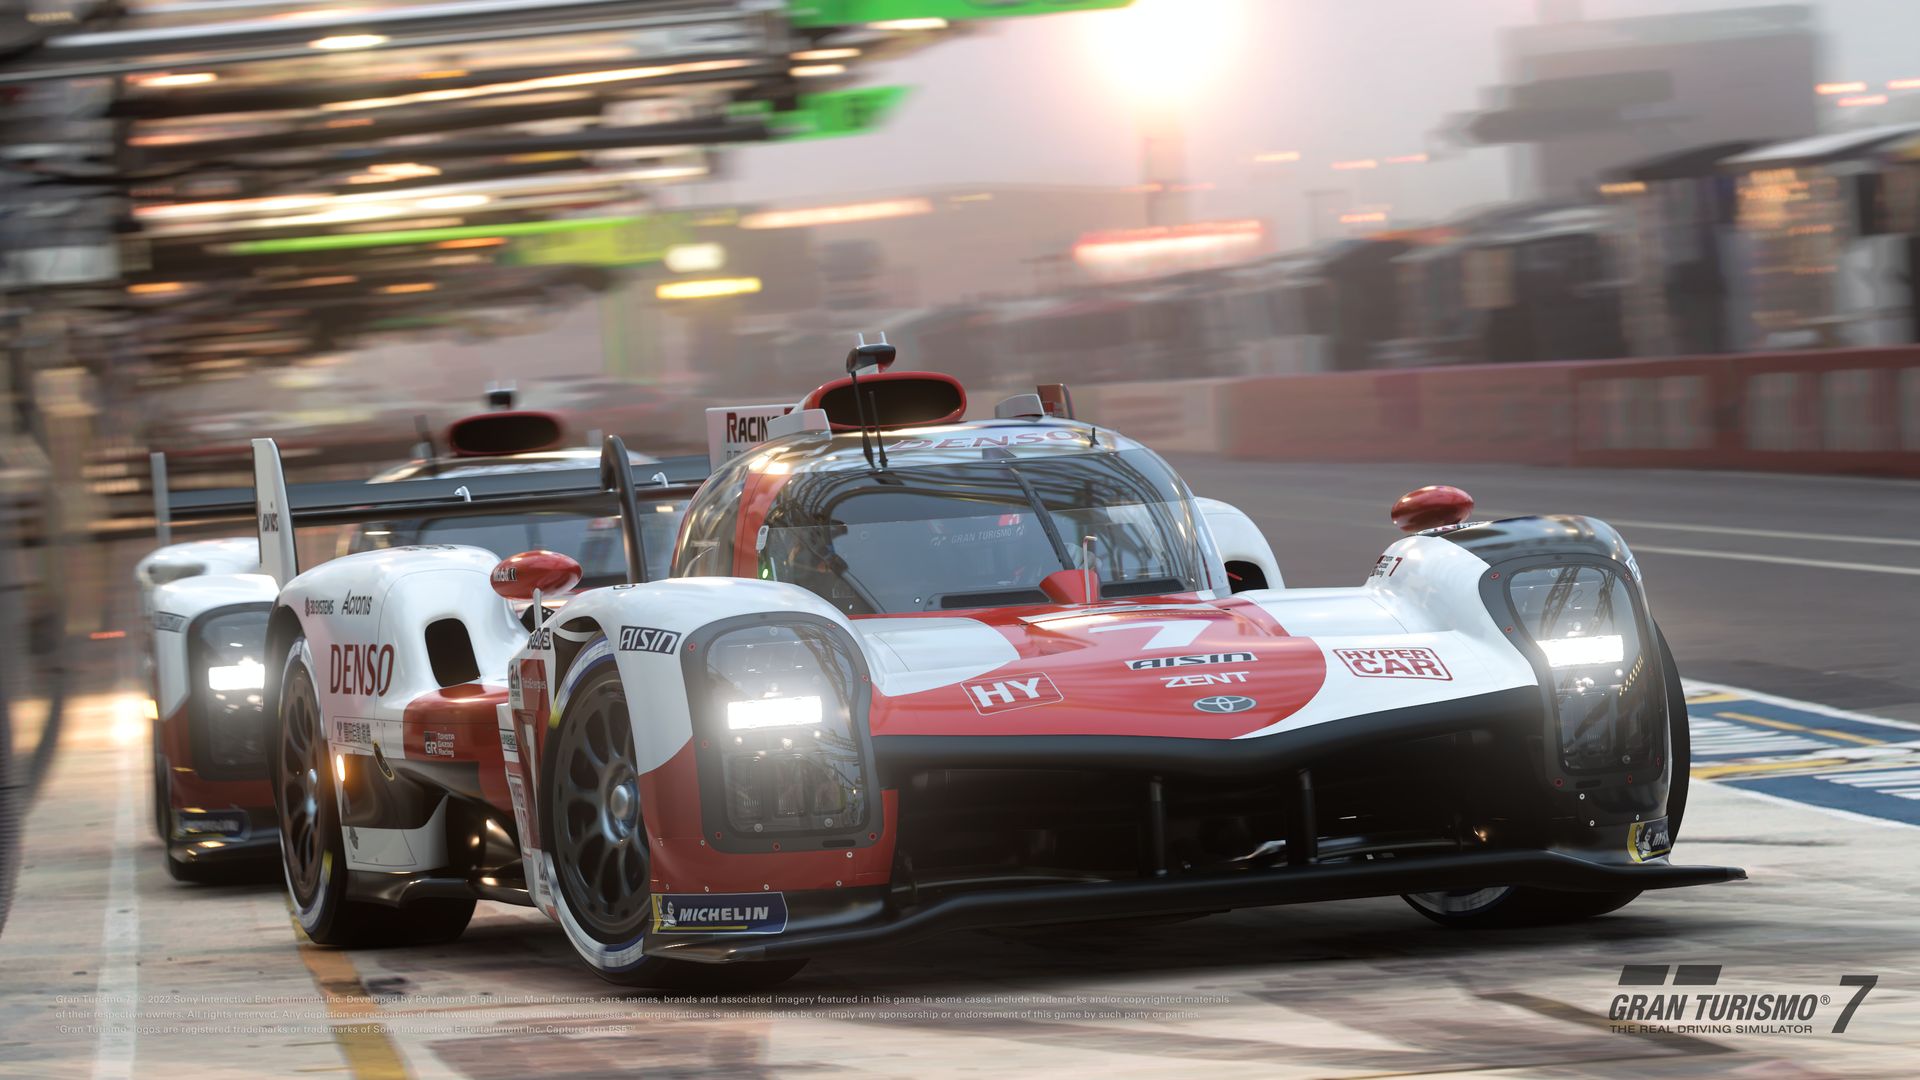 Gran Turismo 7 Review: 4K Graphics, 420+ Cars, Not Much Innovation